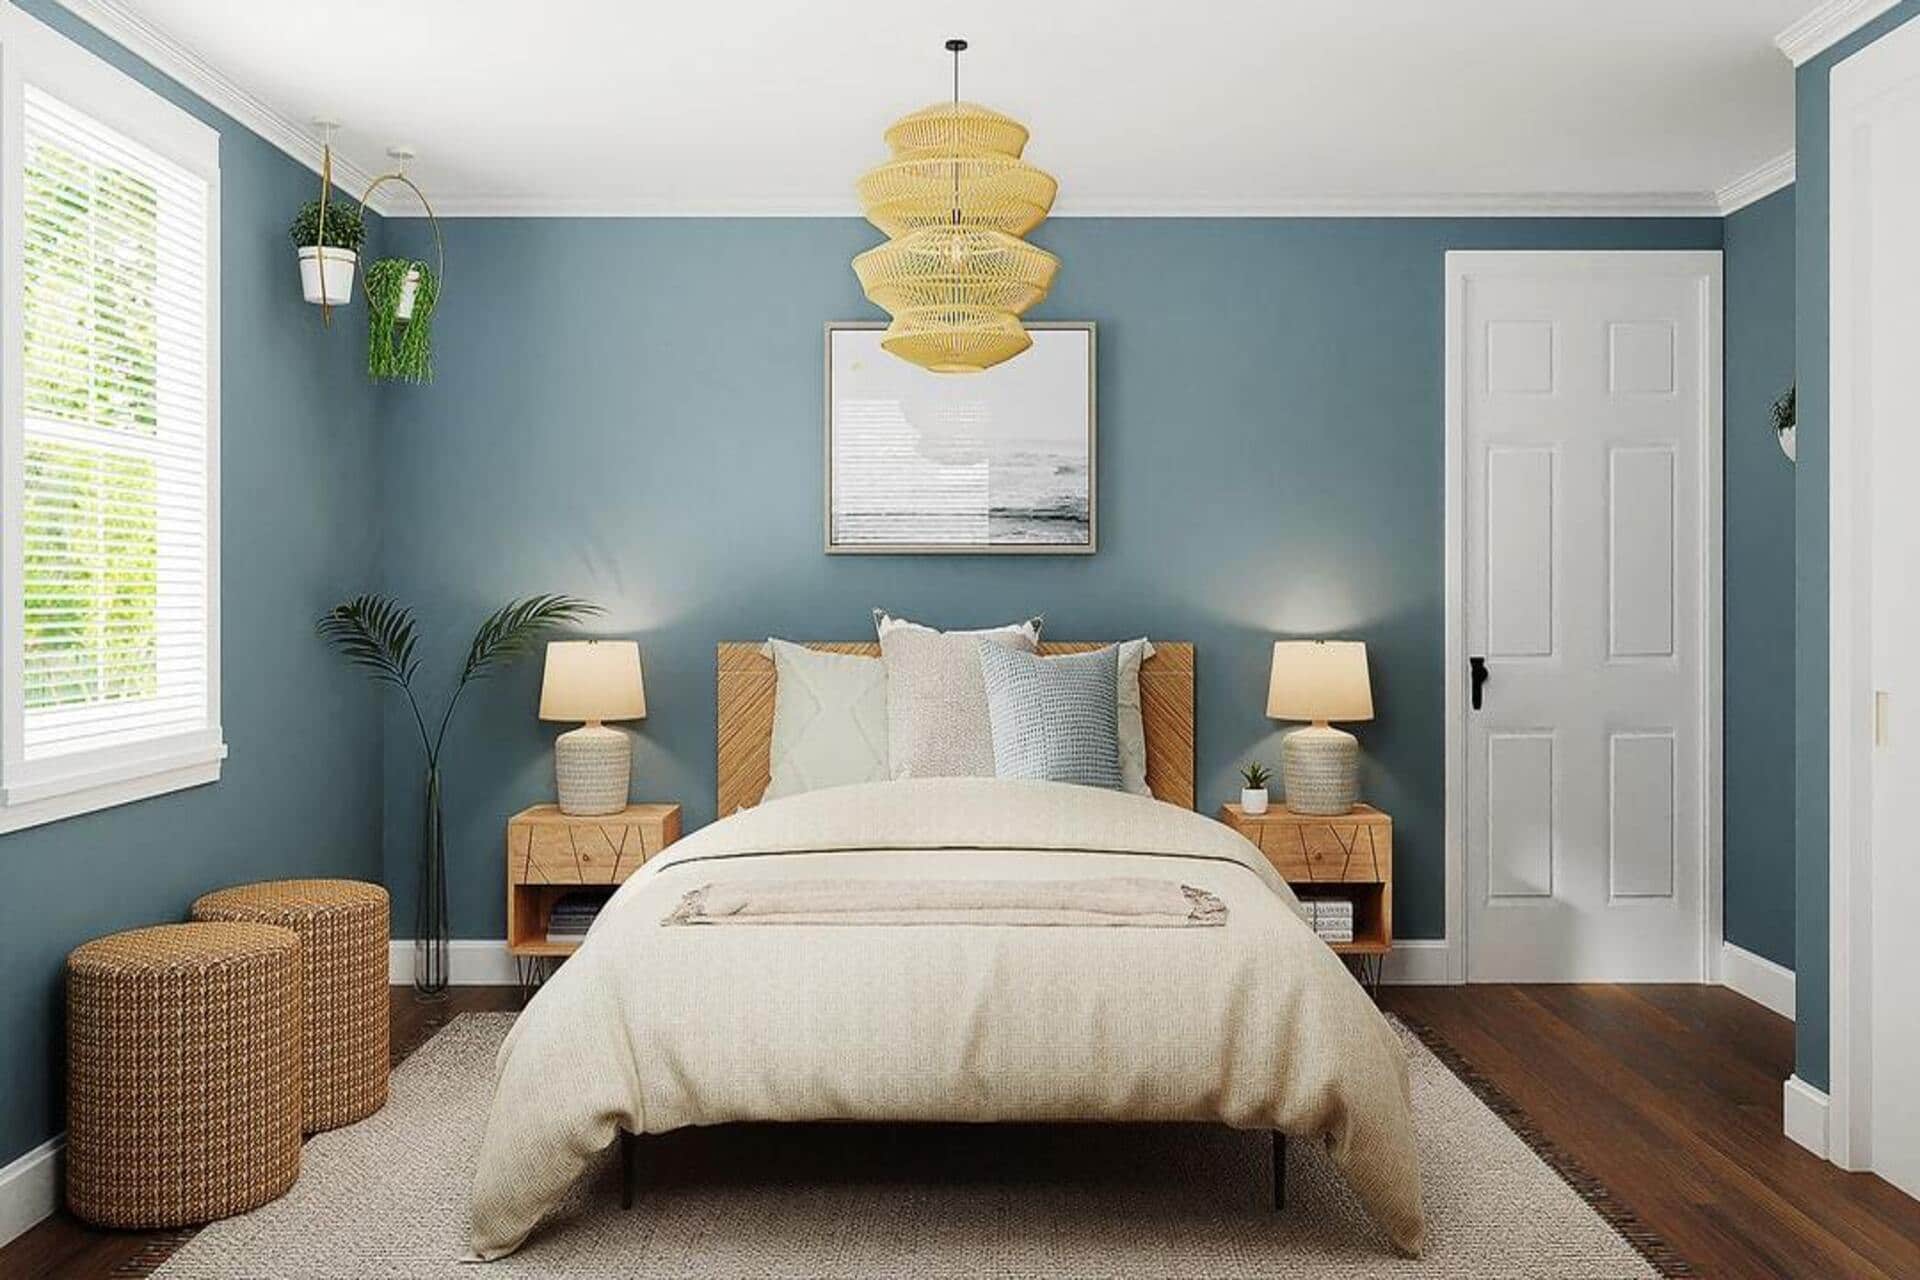 Create Your Own Chic And Cozy Bedroom With These How-To Tips. Pale blue accent wall and furniture set with queen bed and fluffy rug on the dark laminate